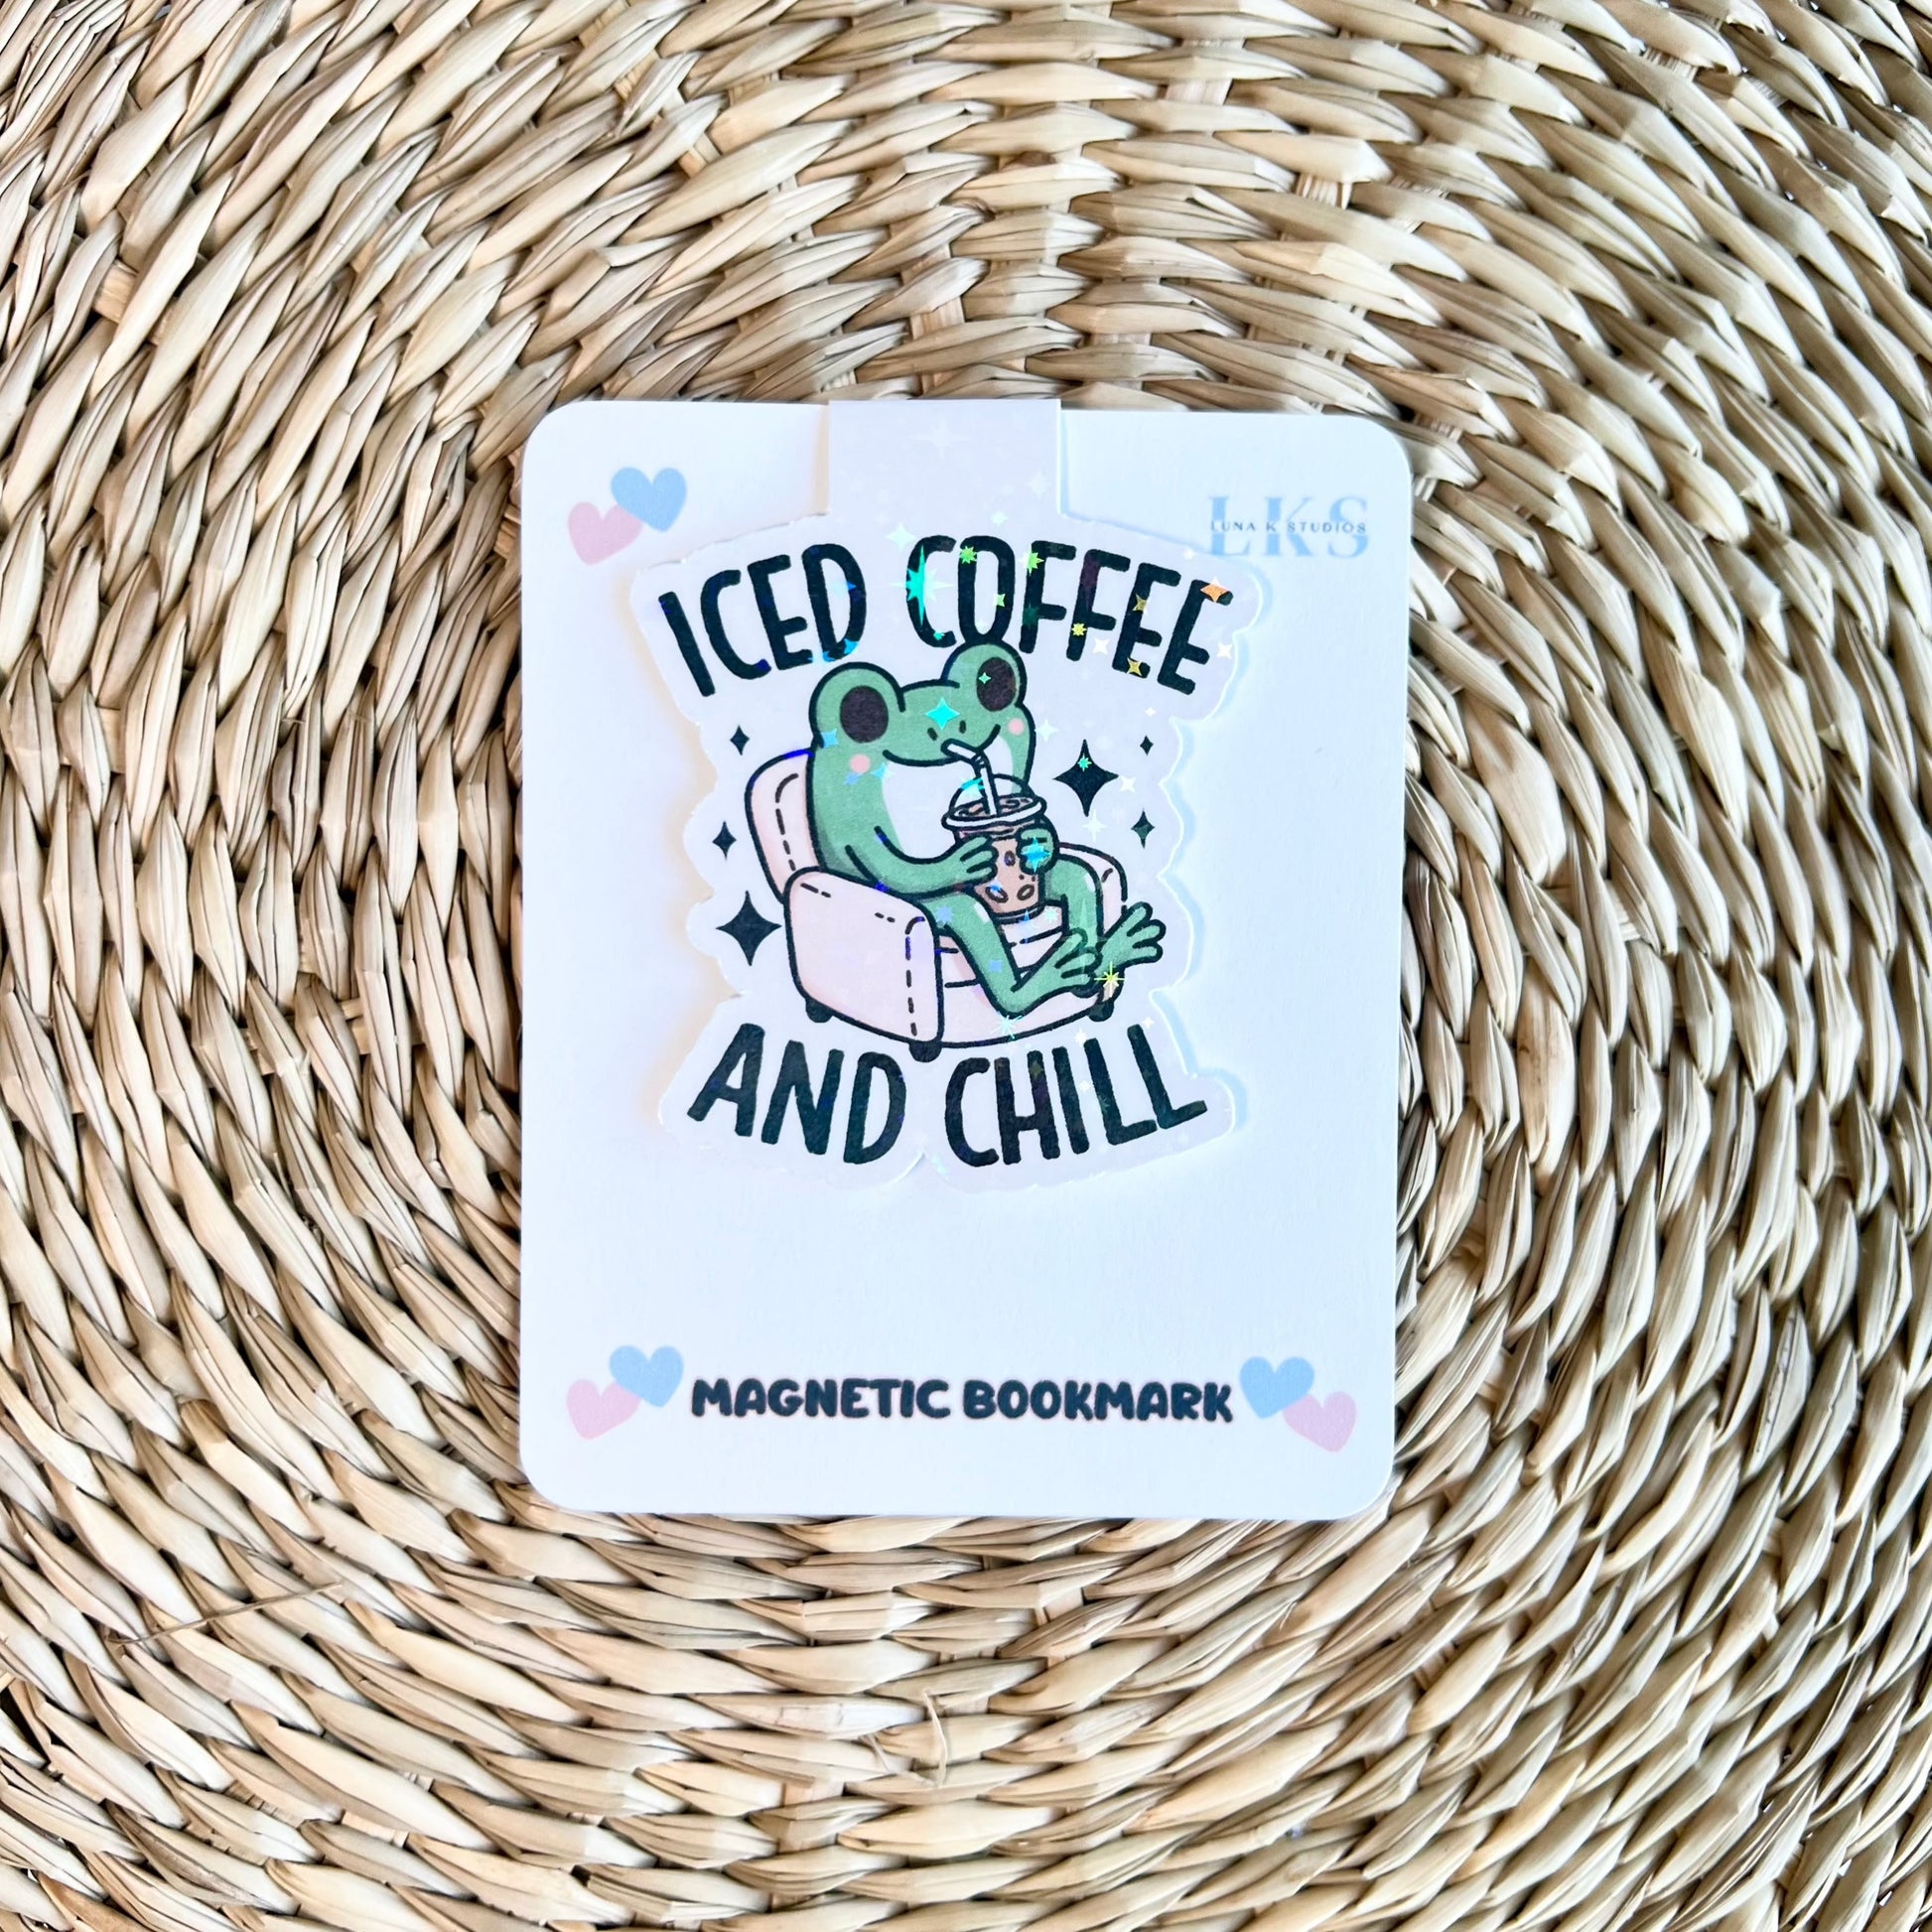 Iced Coffee And Chill Magnetic Bookmark